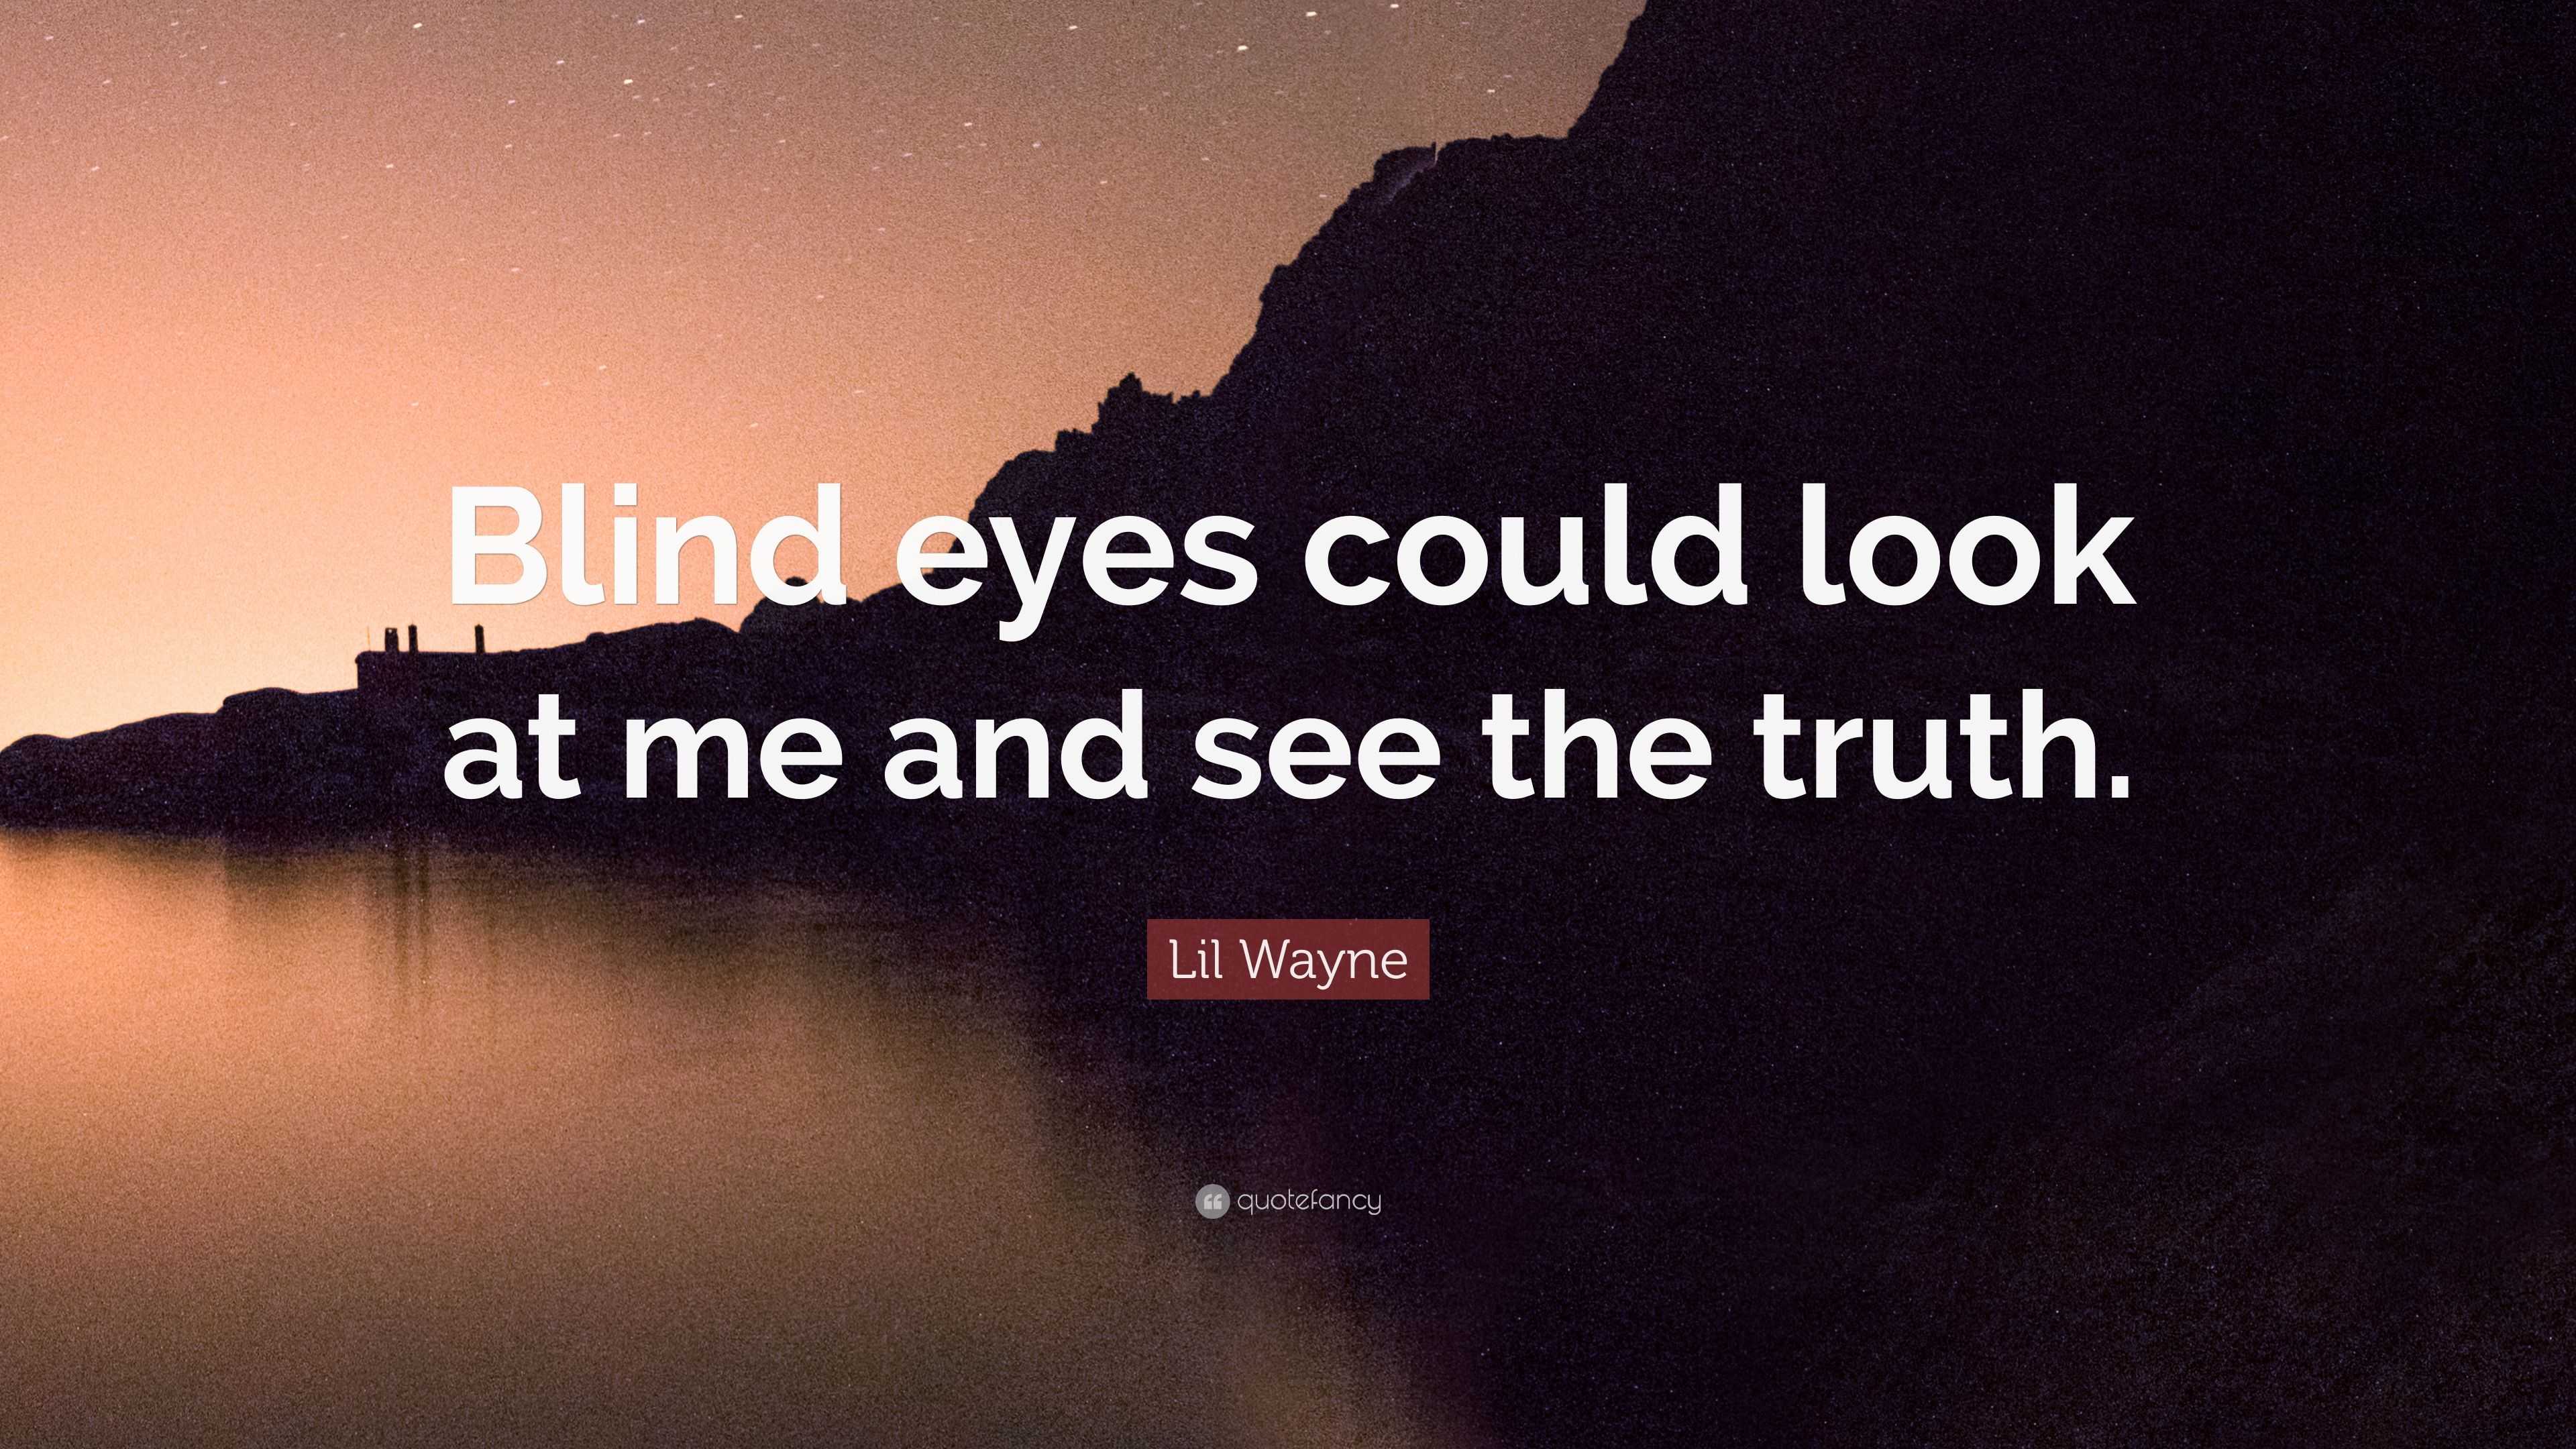 Lil Wayne Quote “Blind eyes could look at me and see the truth